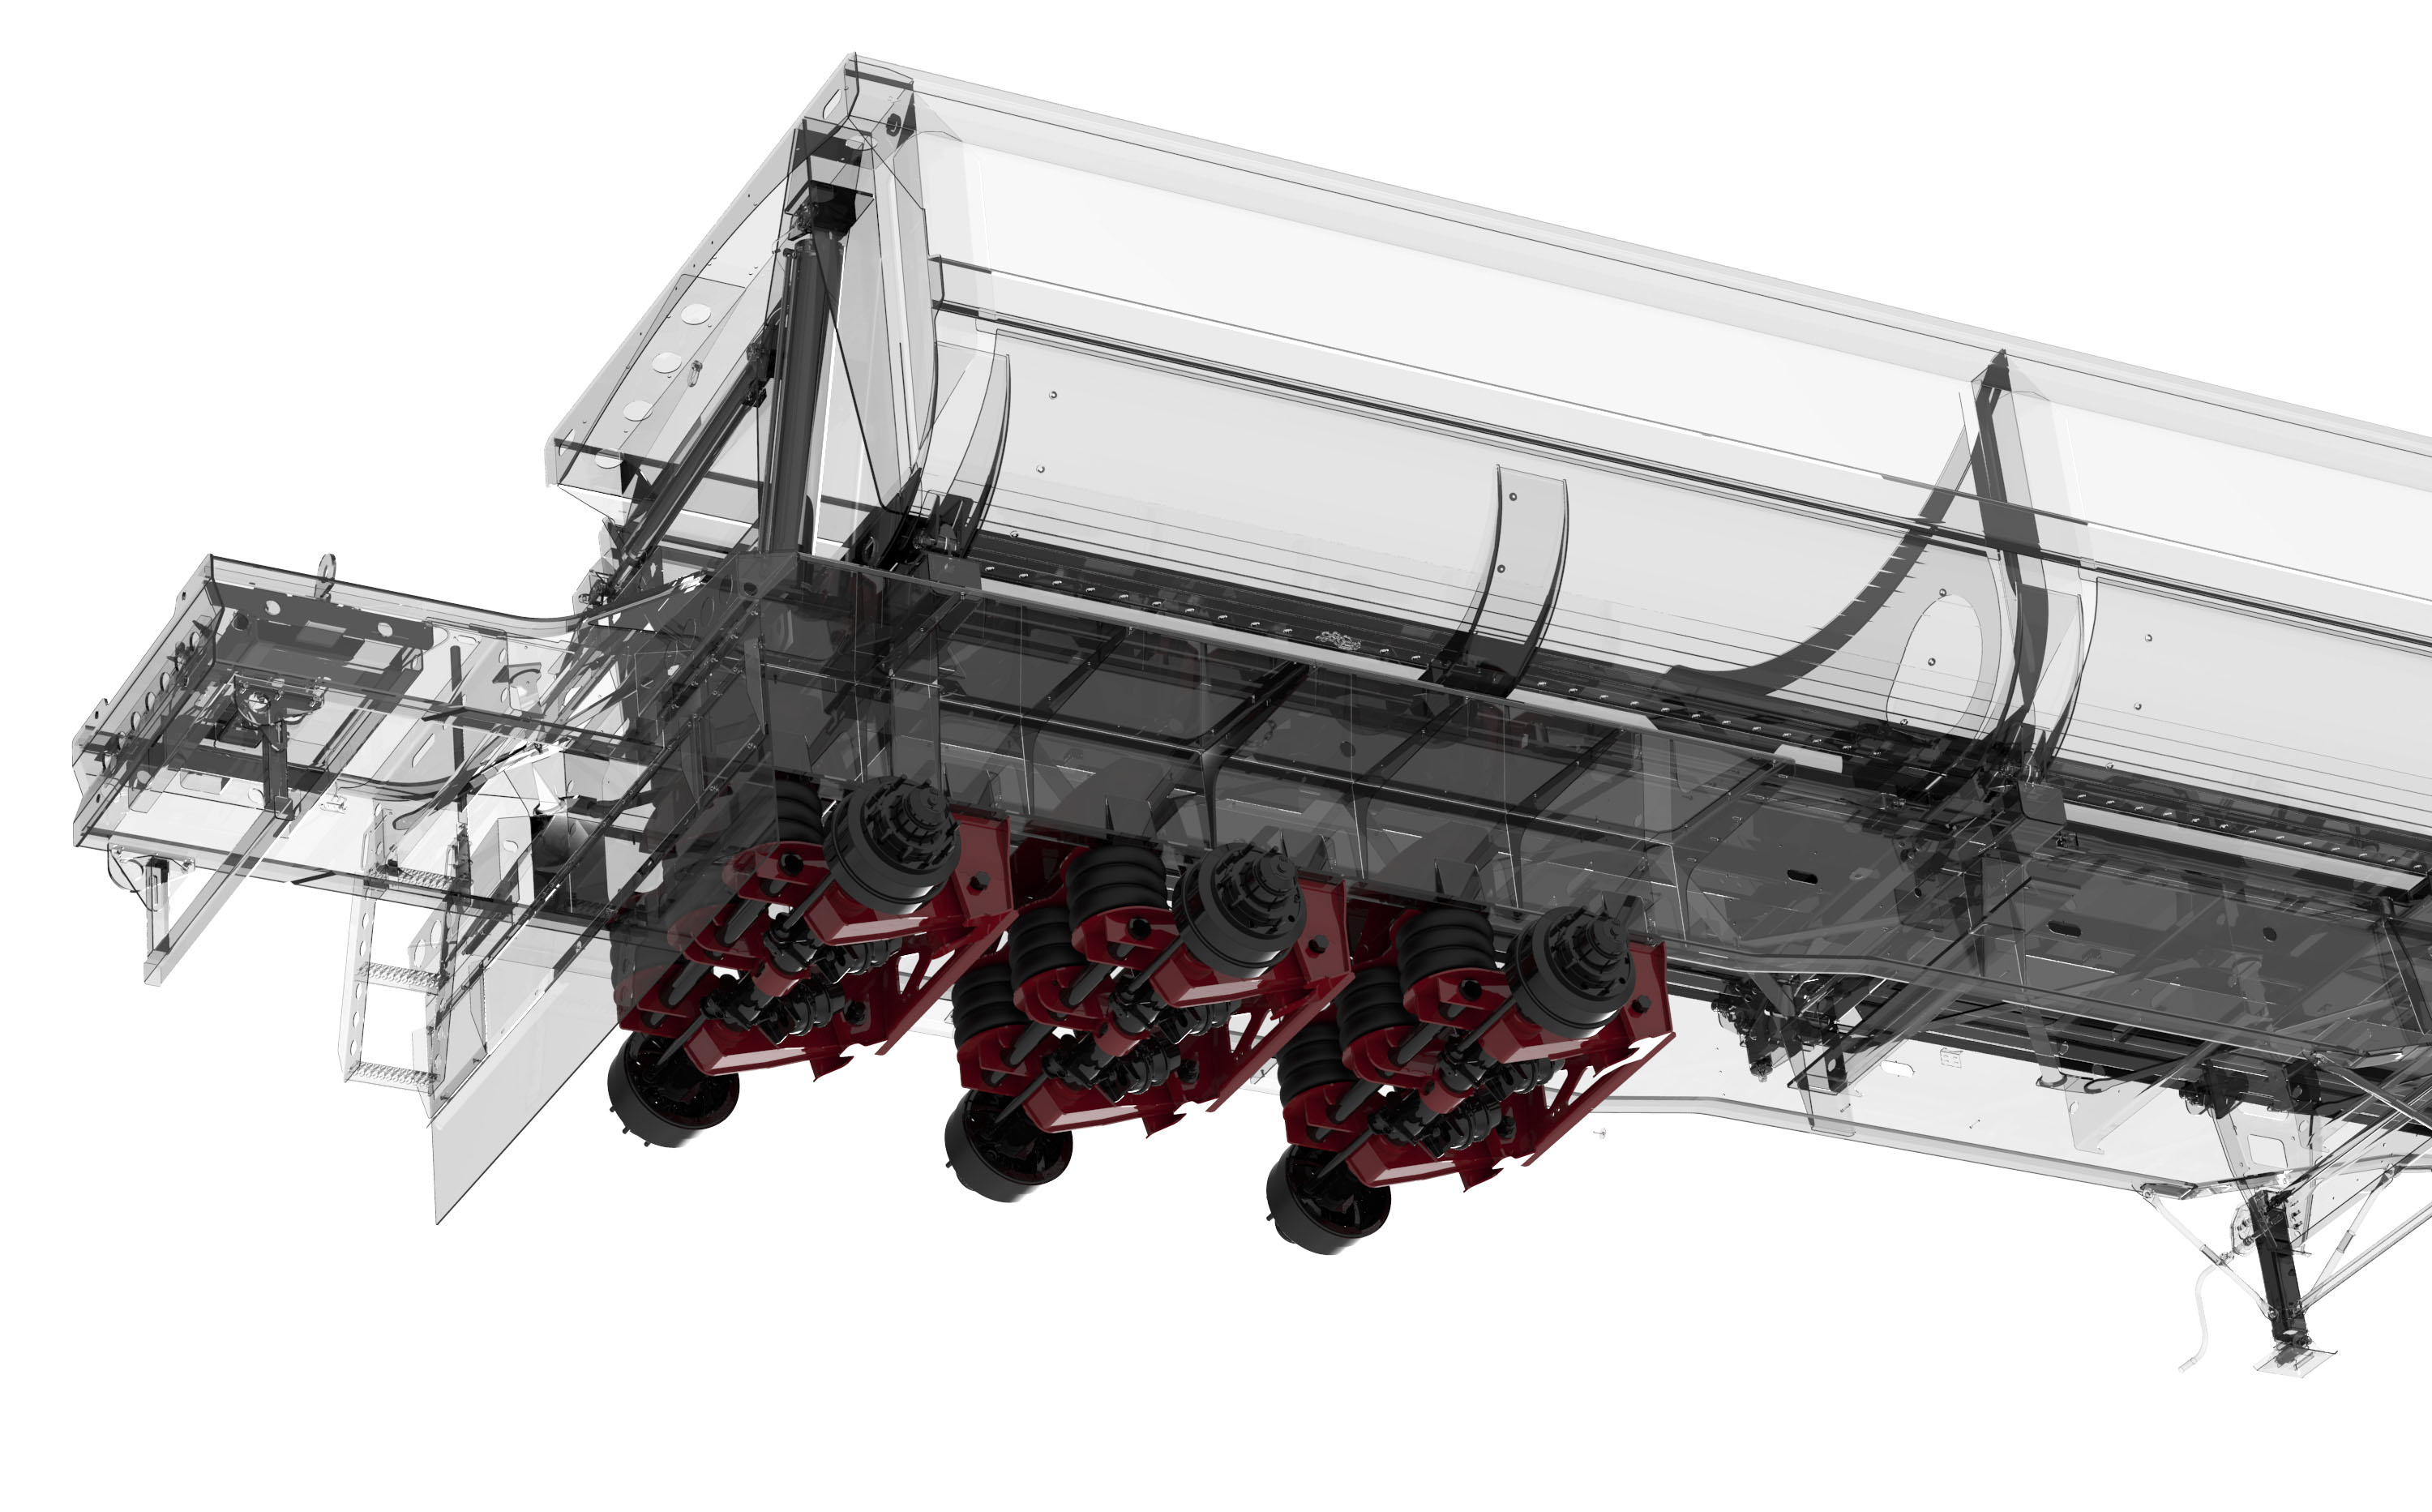 In its tri-axle configuration, the TR50-HDT gives trailer OEMs the ability to achieve the higher load capacities they seek, while maintaining the superior ride of an air-ride suspension.